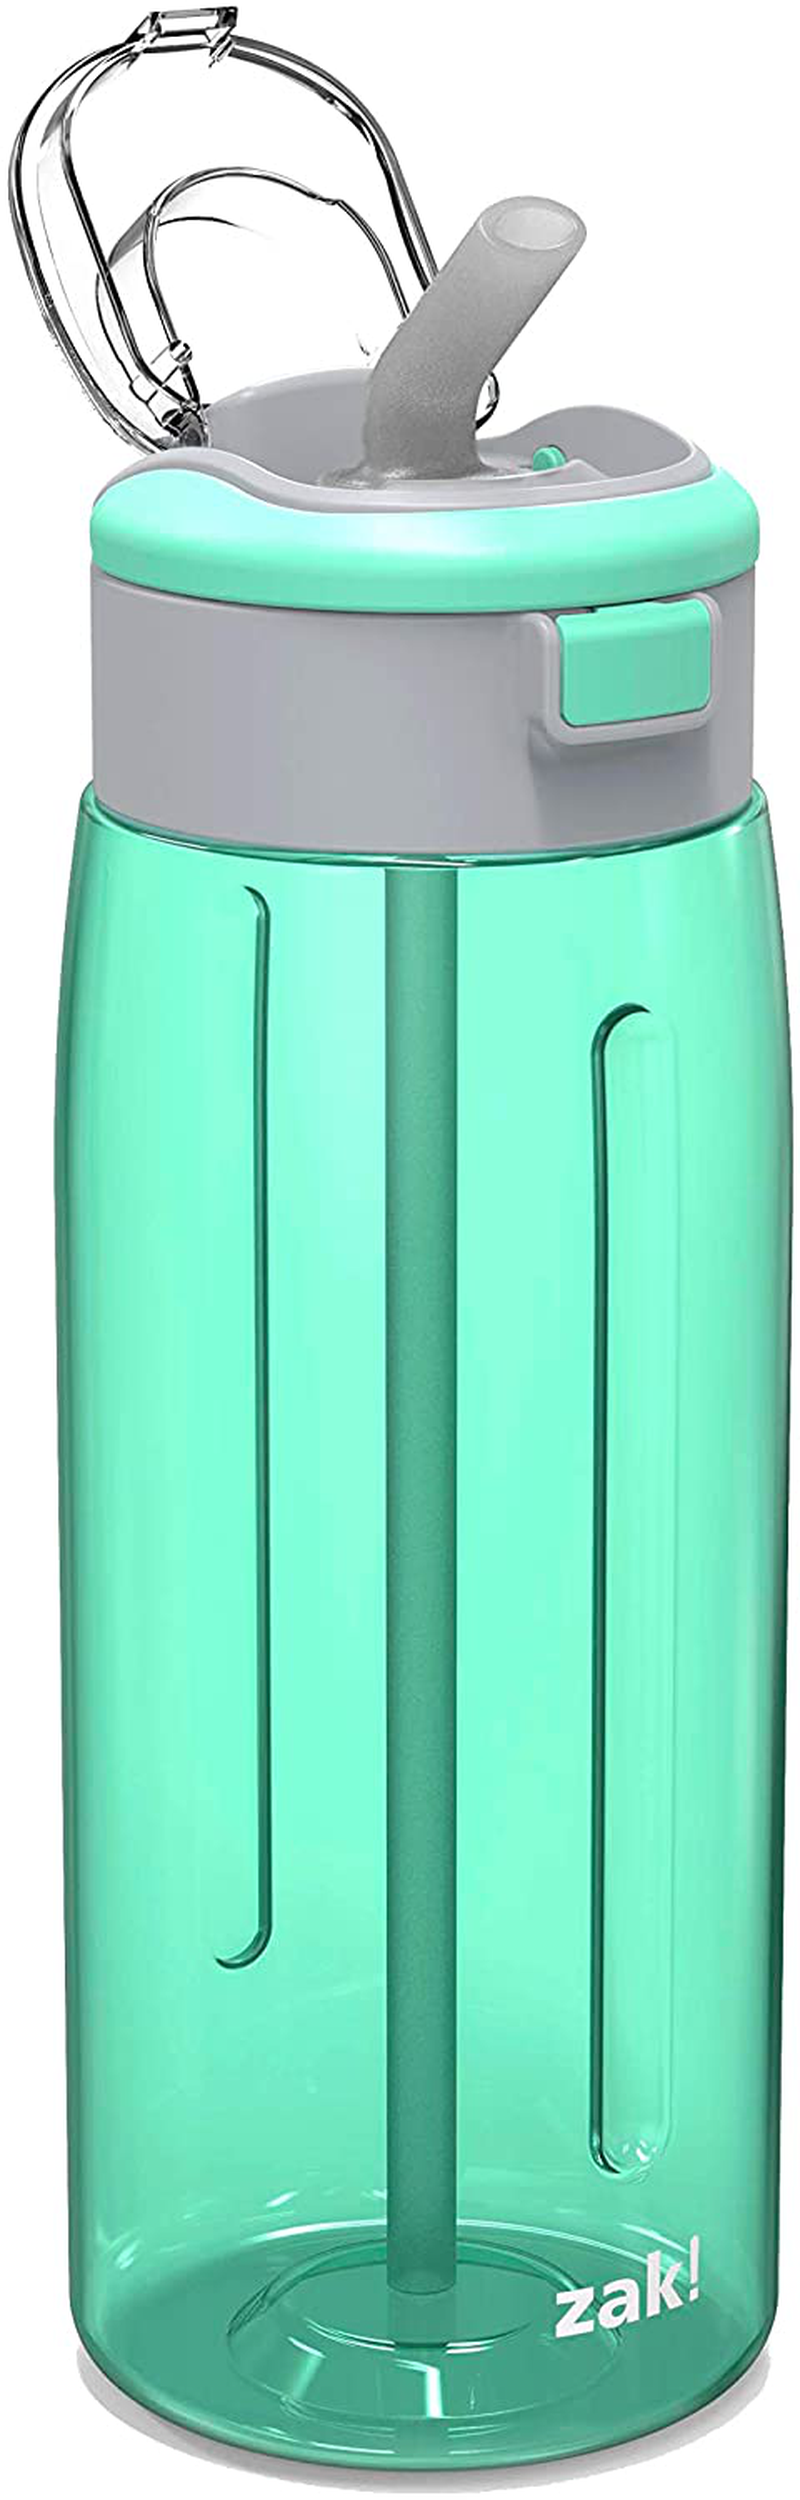 Zak Designs Genesis Durable Plastic Water Bottle with Interchangeable Lid and Built-In Carry Handle, Leak-Proof Design is Perfect for Outdoor Sports (32oz, Lilac)